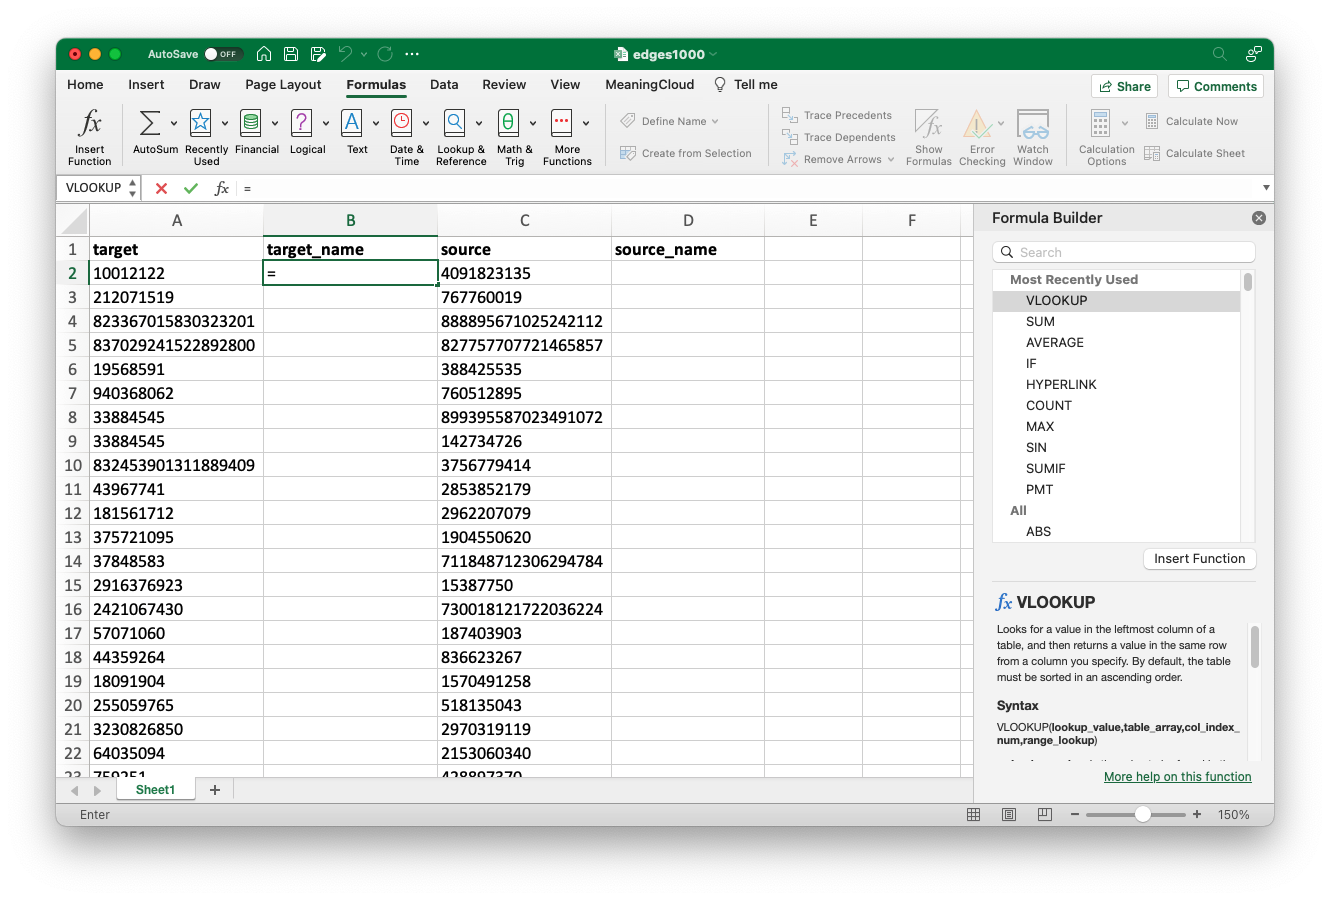 Search for VLOOKUP on the "Formulas" tab.